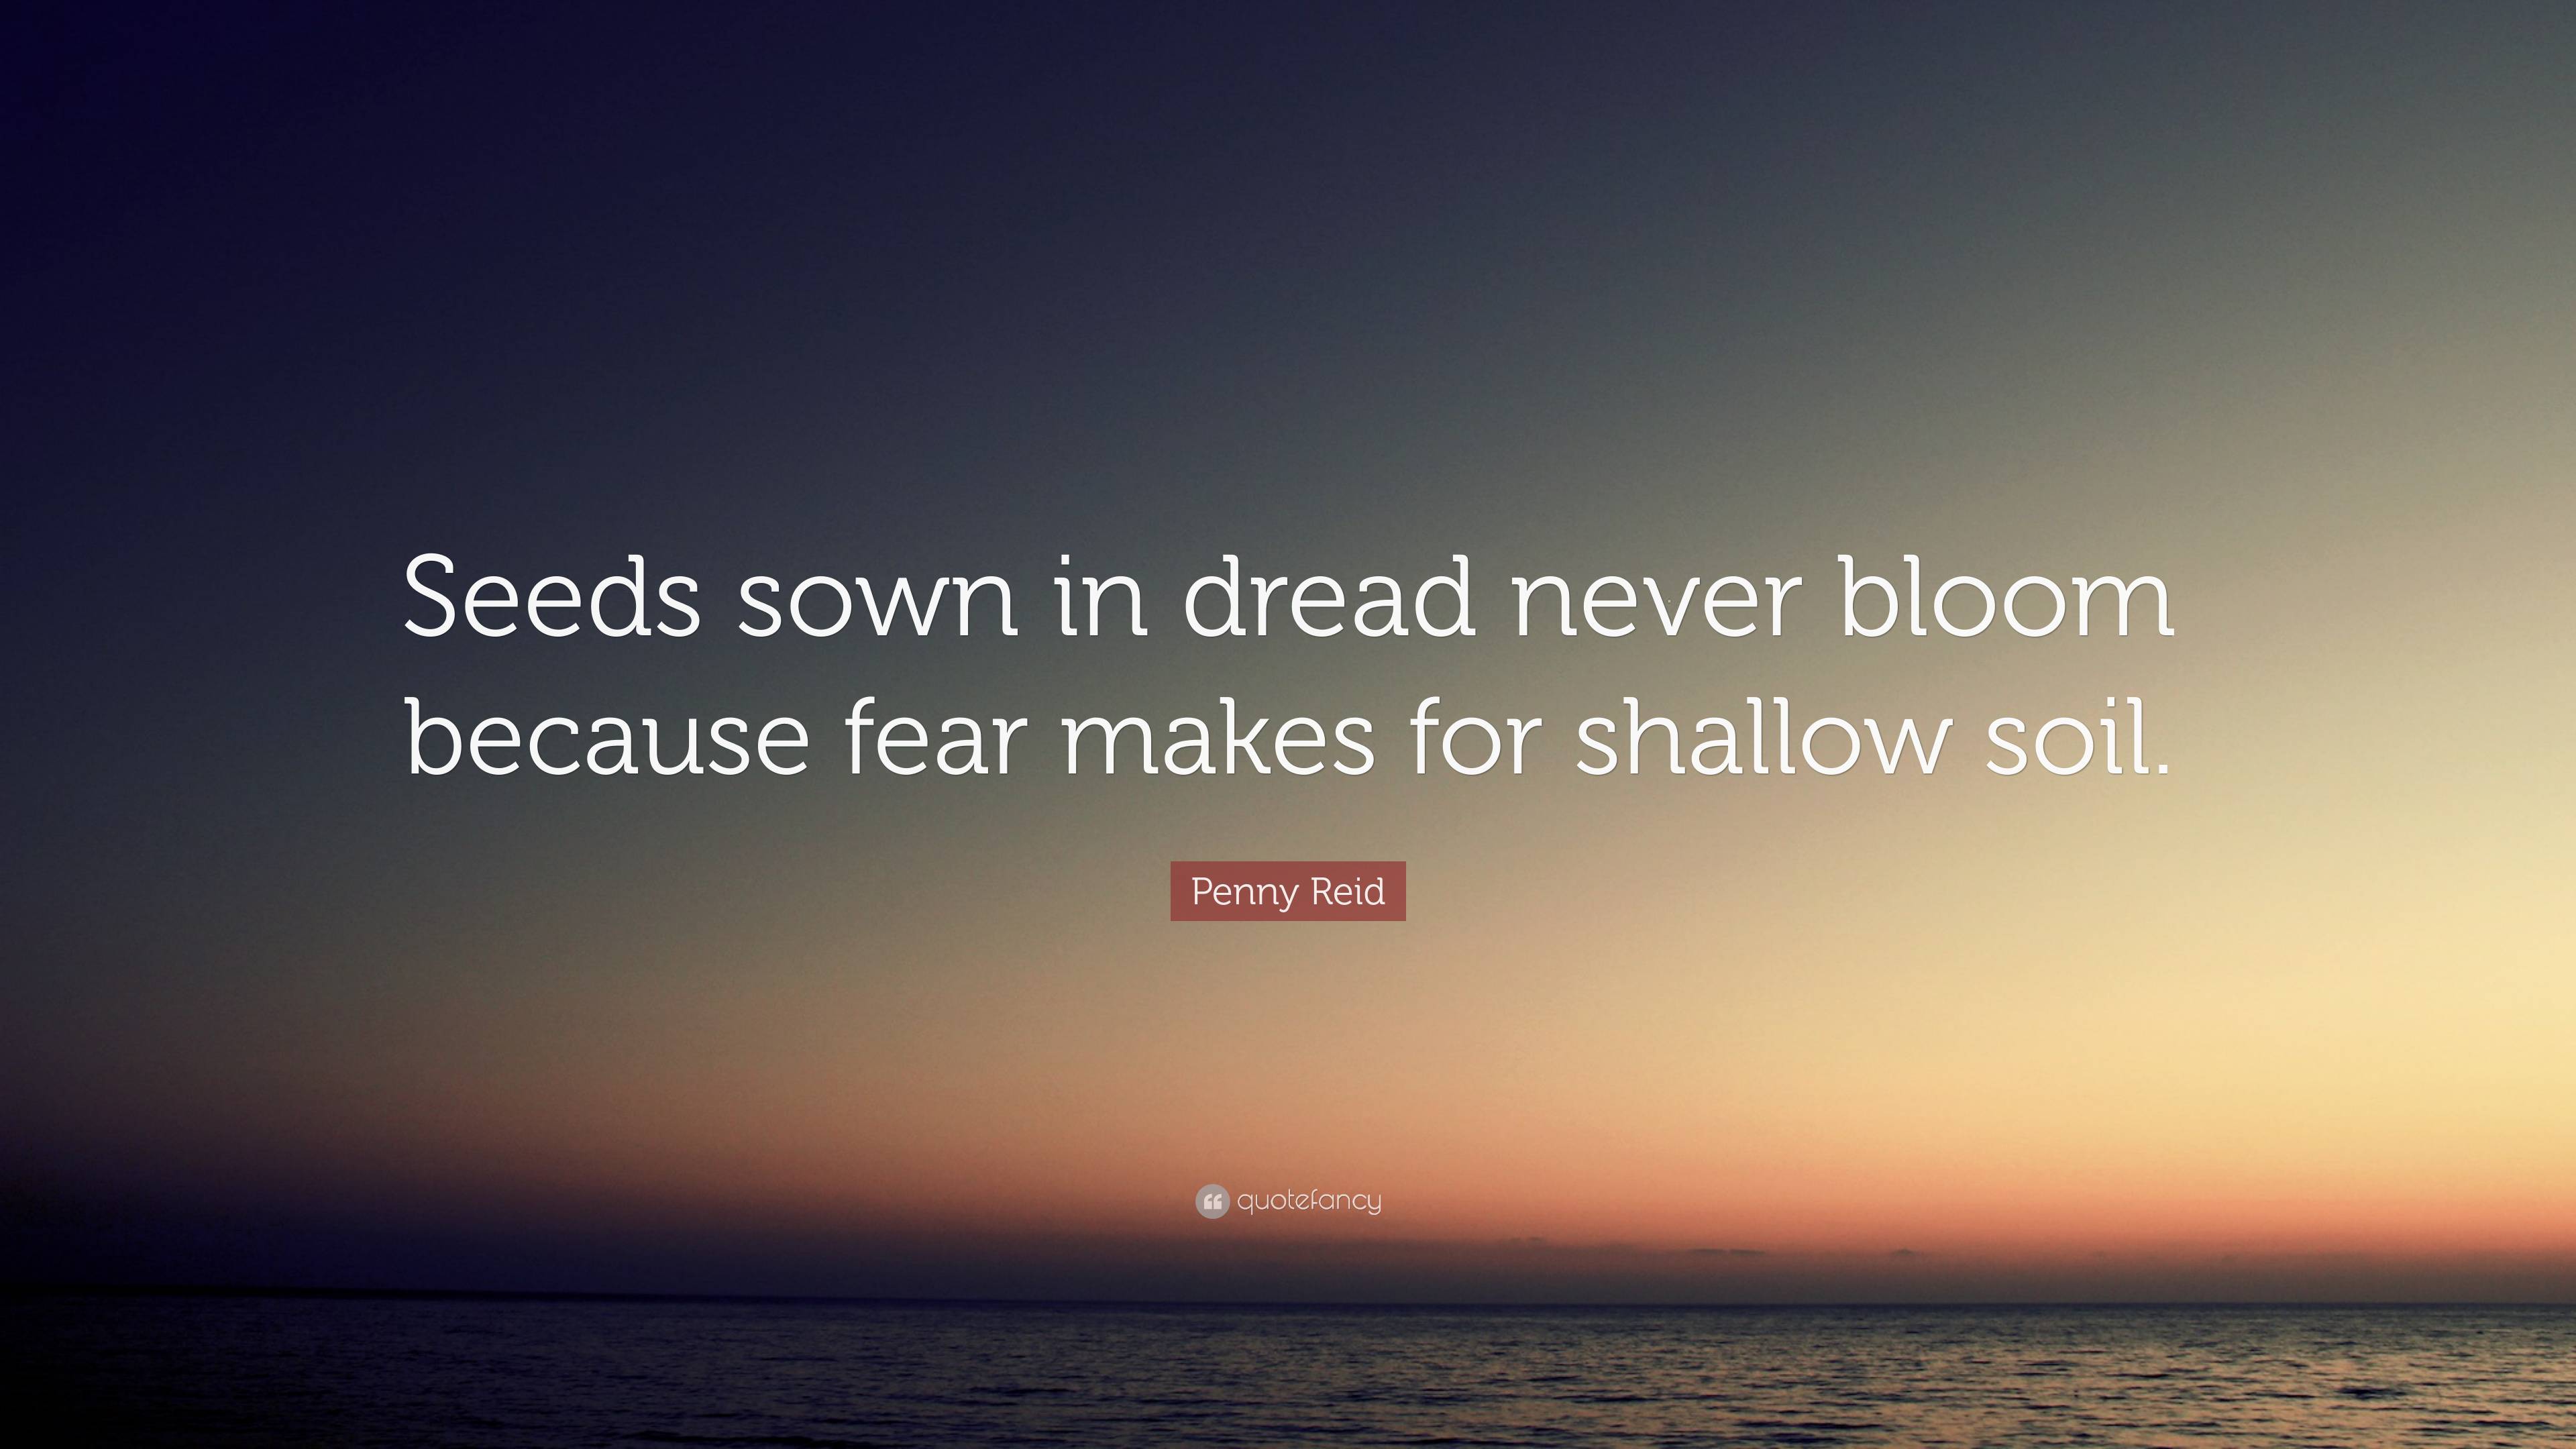 Penny Reid Quote: “Seeds sown in dread never bloom because fear makes ...